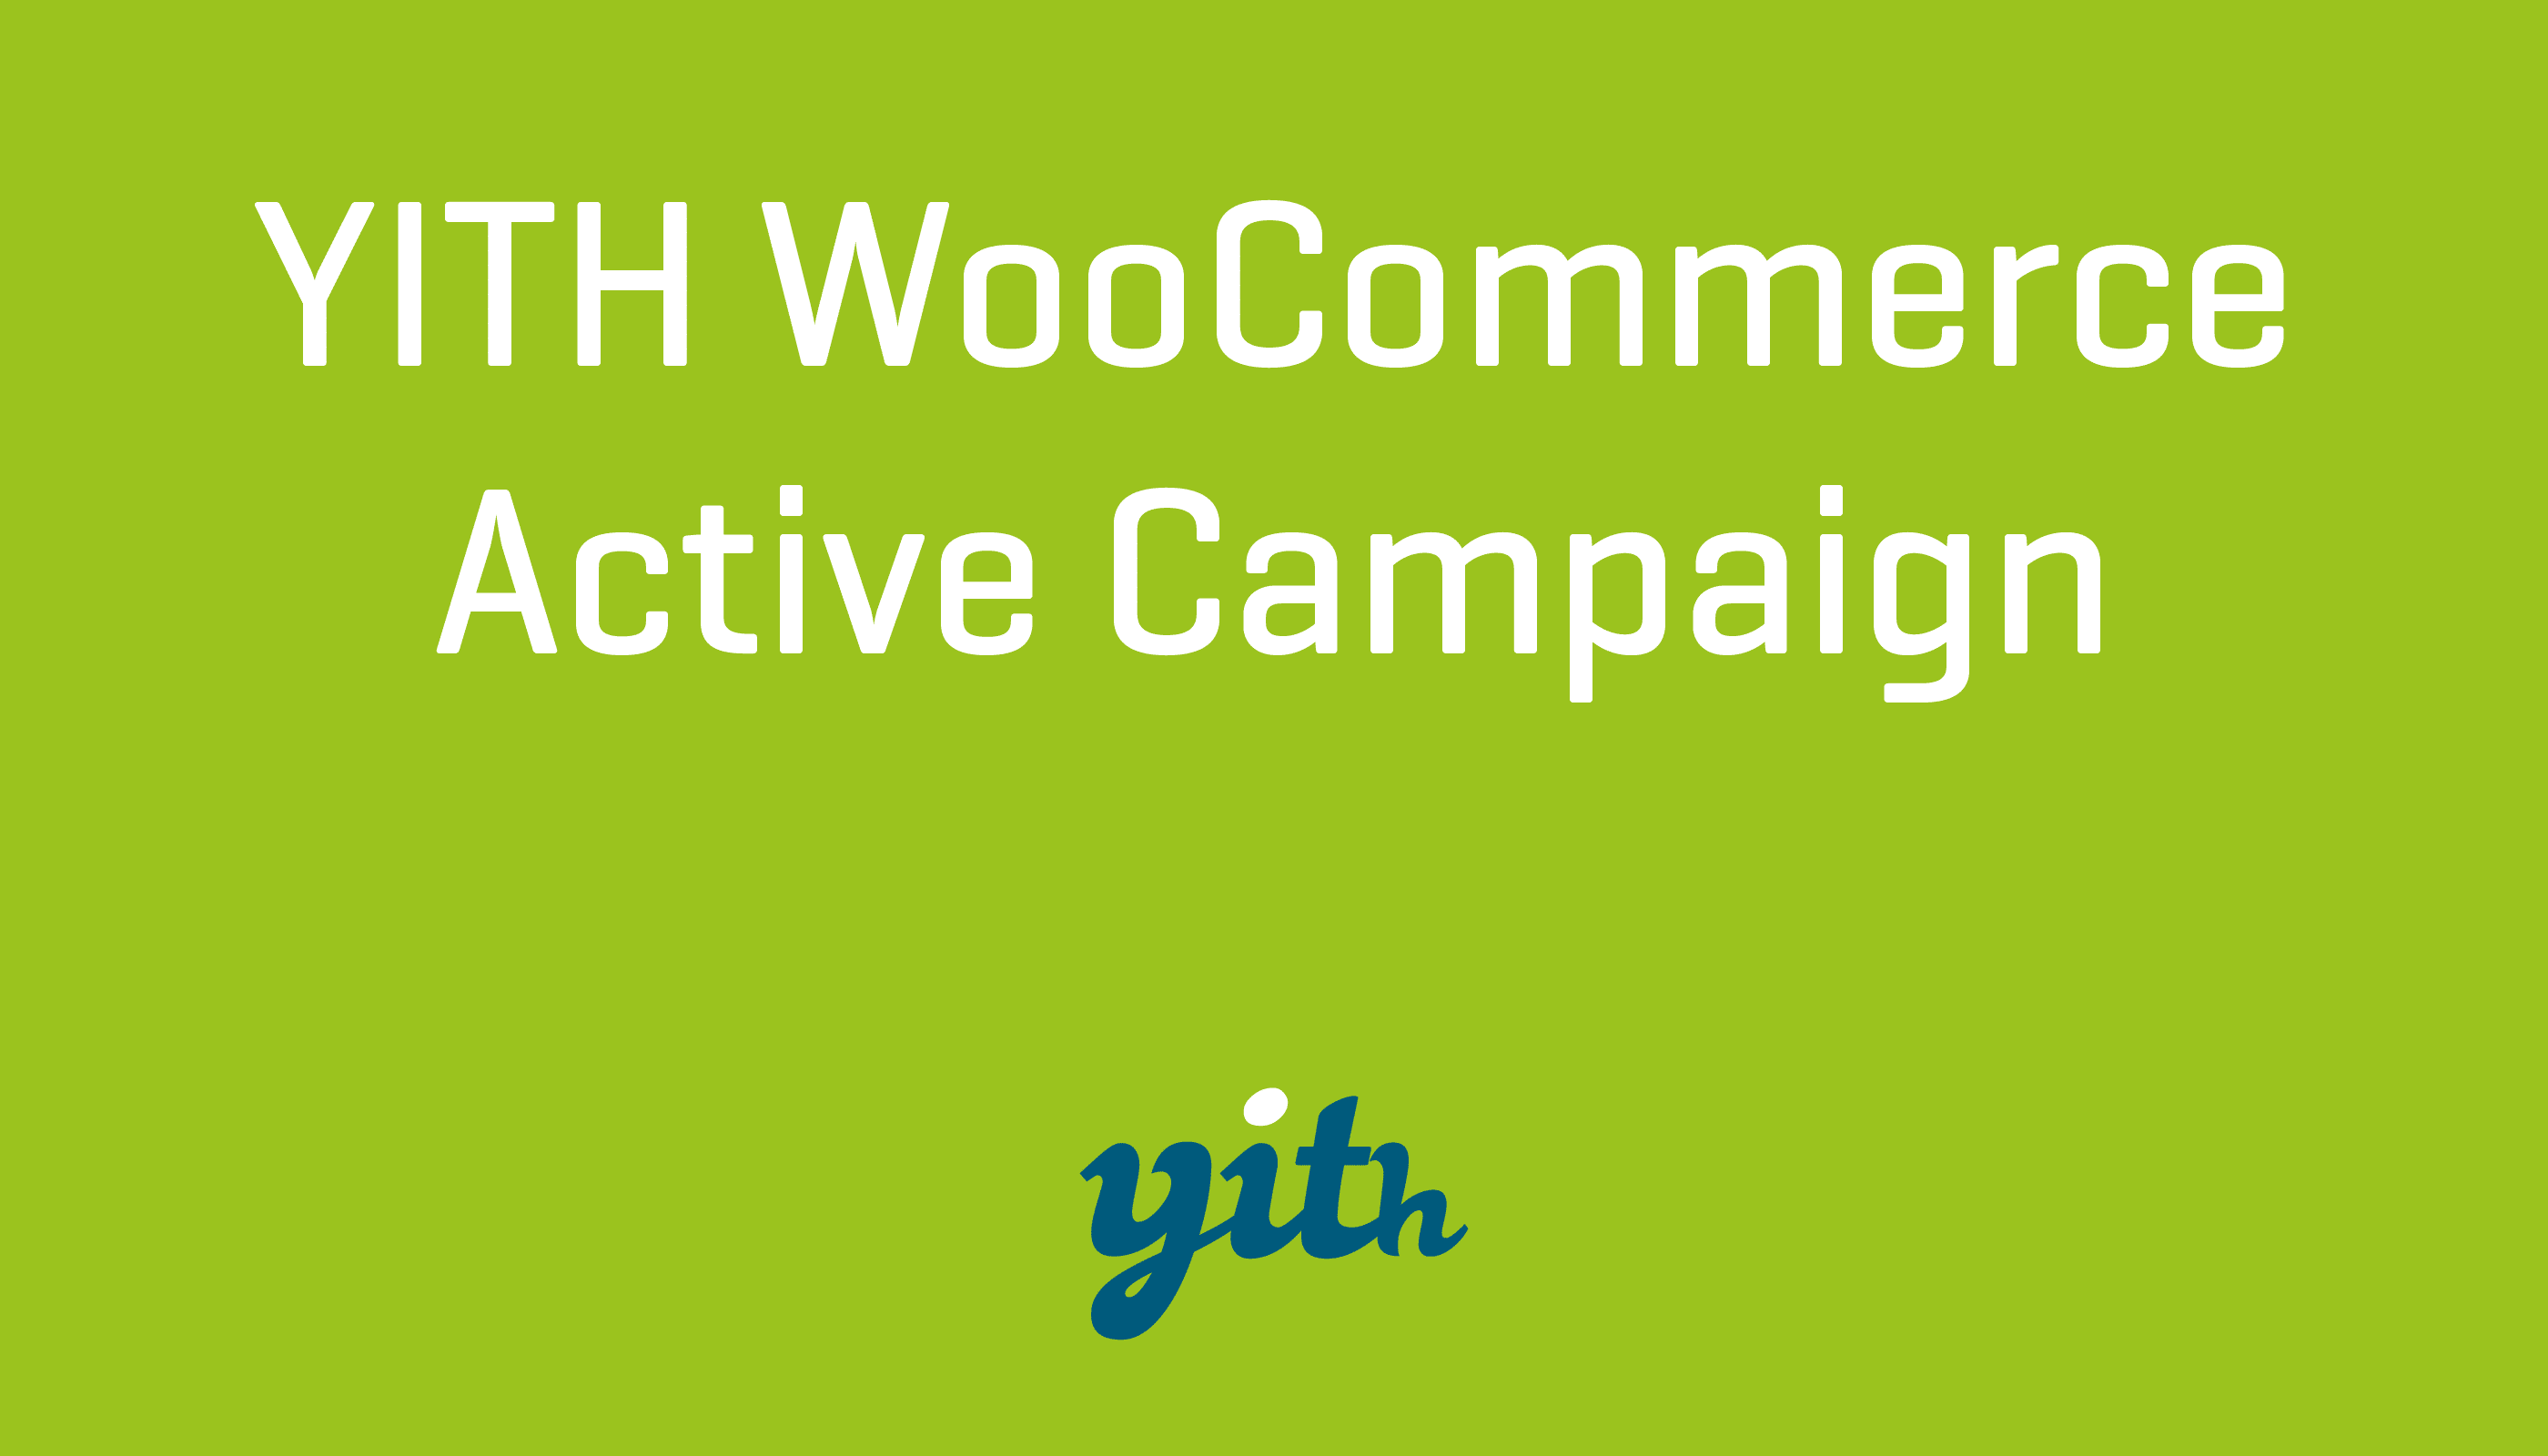 YITH WooCommerce Active Campaign